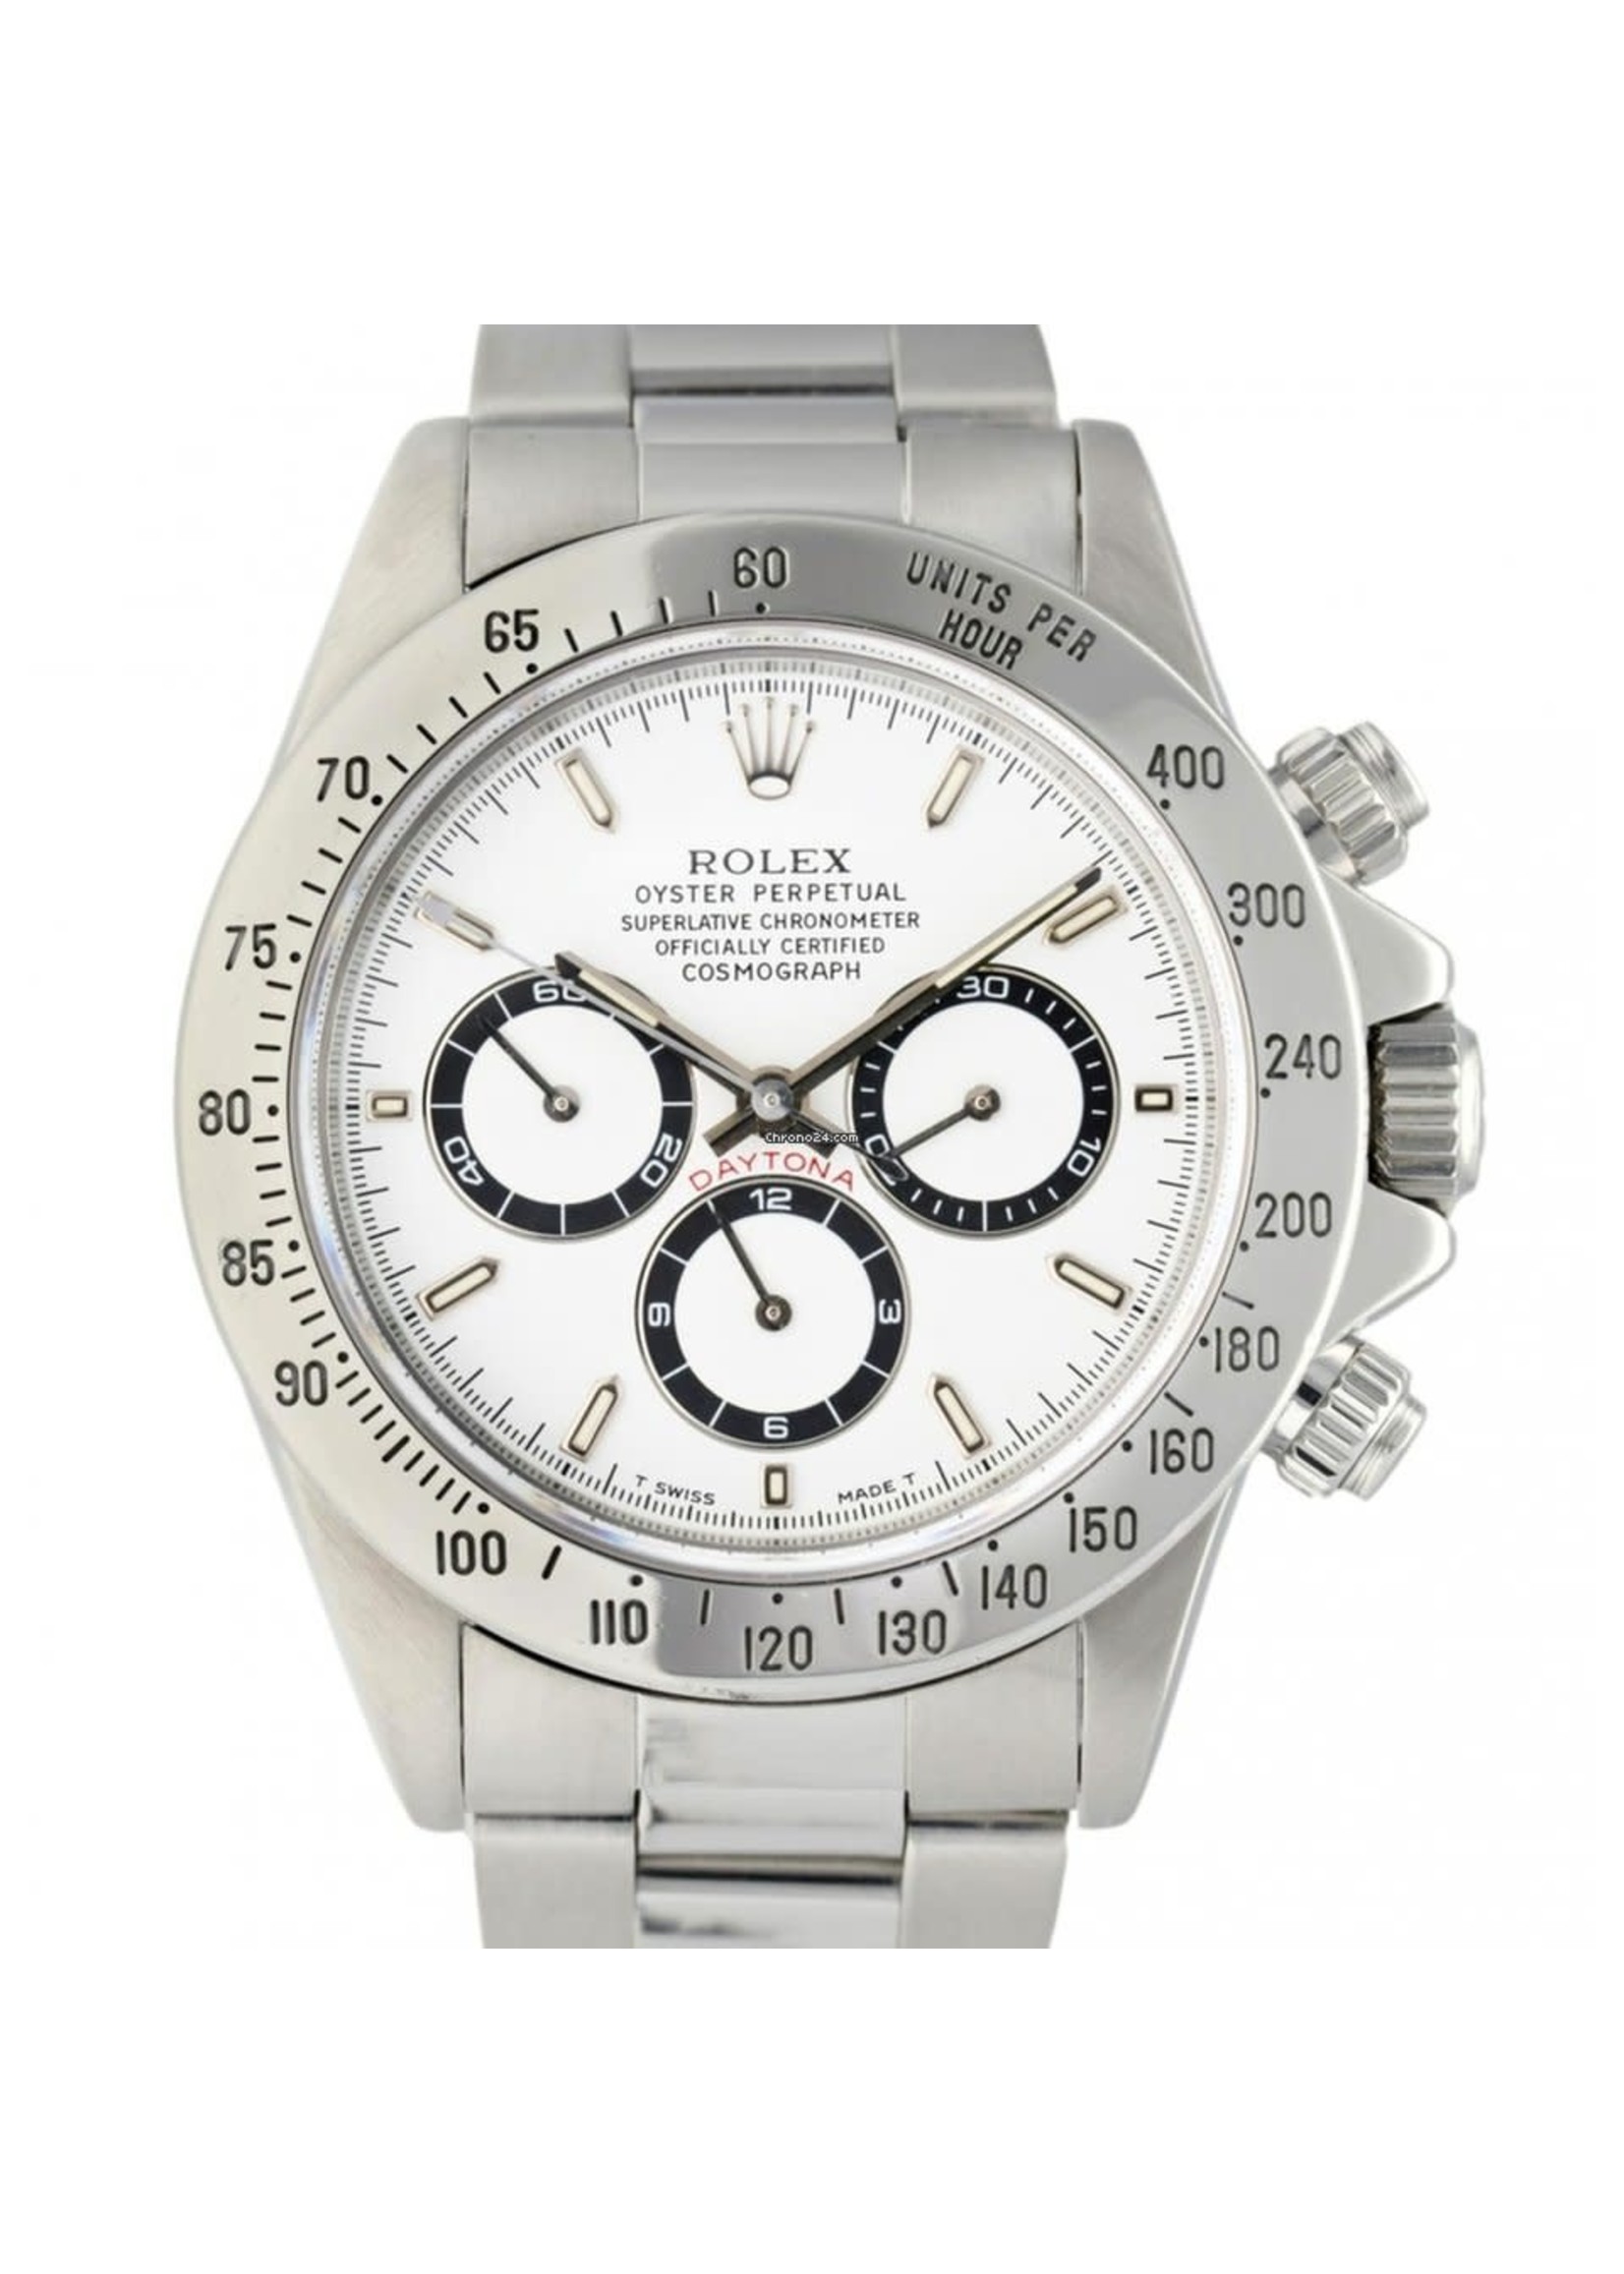 ROLEX DAYTONA 40MM #16520 MINT CONDITION BY APPOINTMENT ONLY